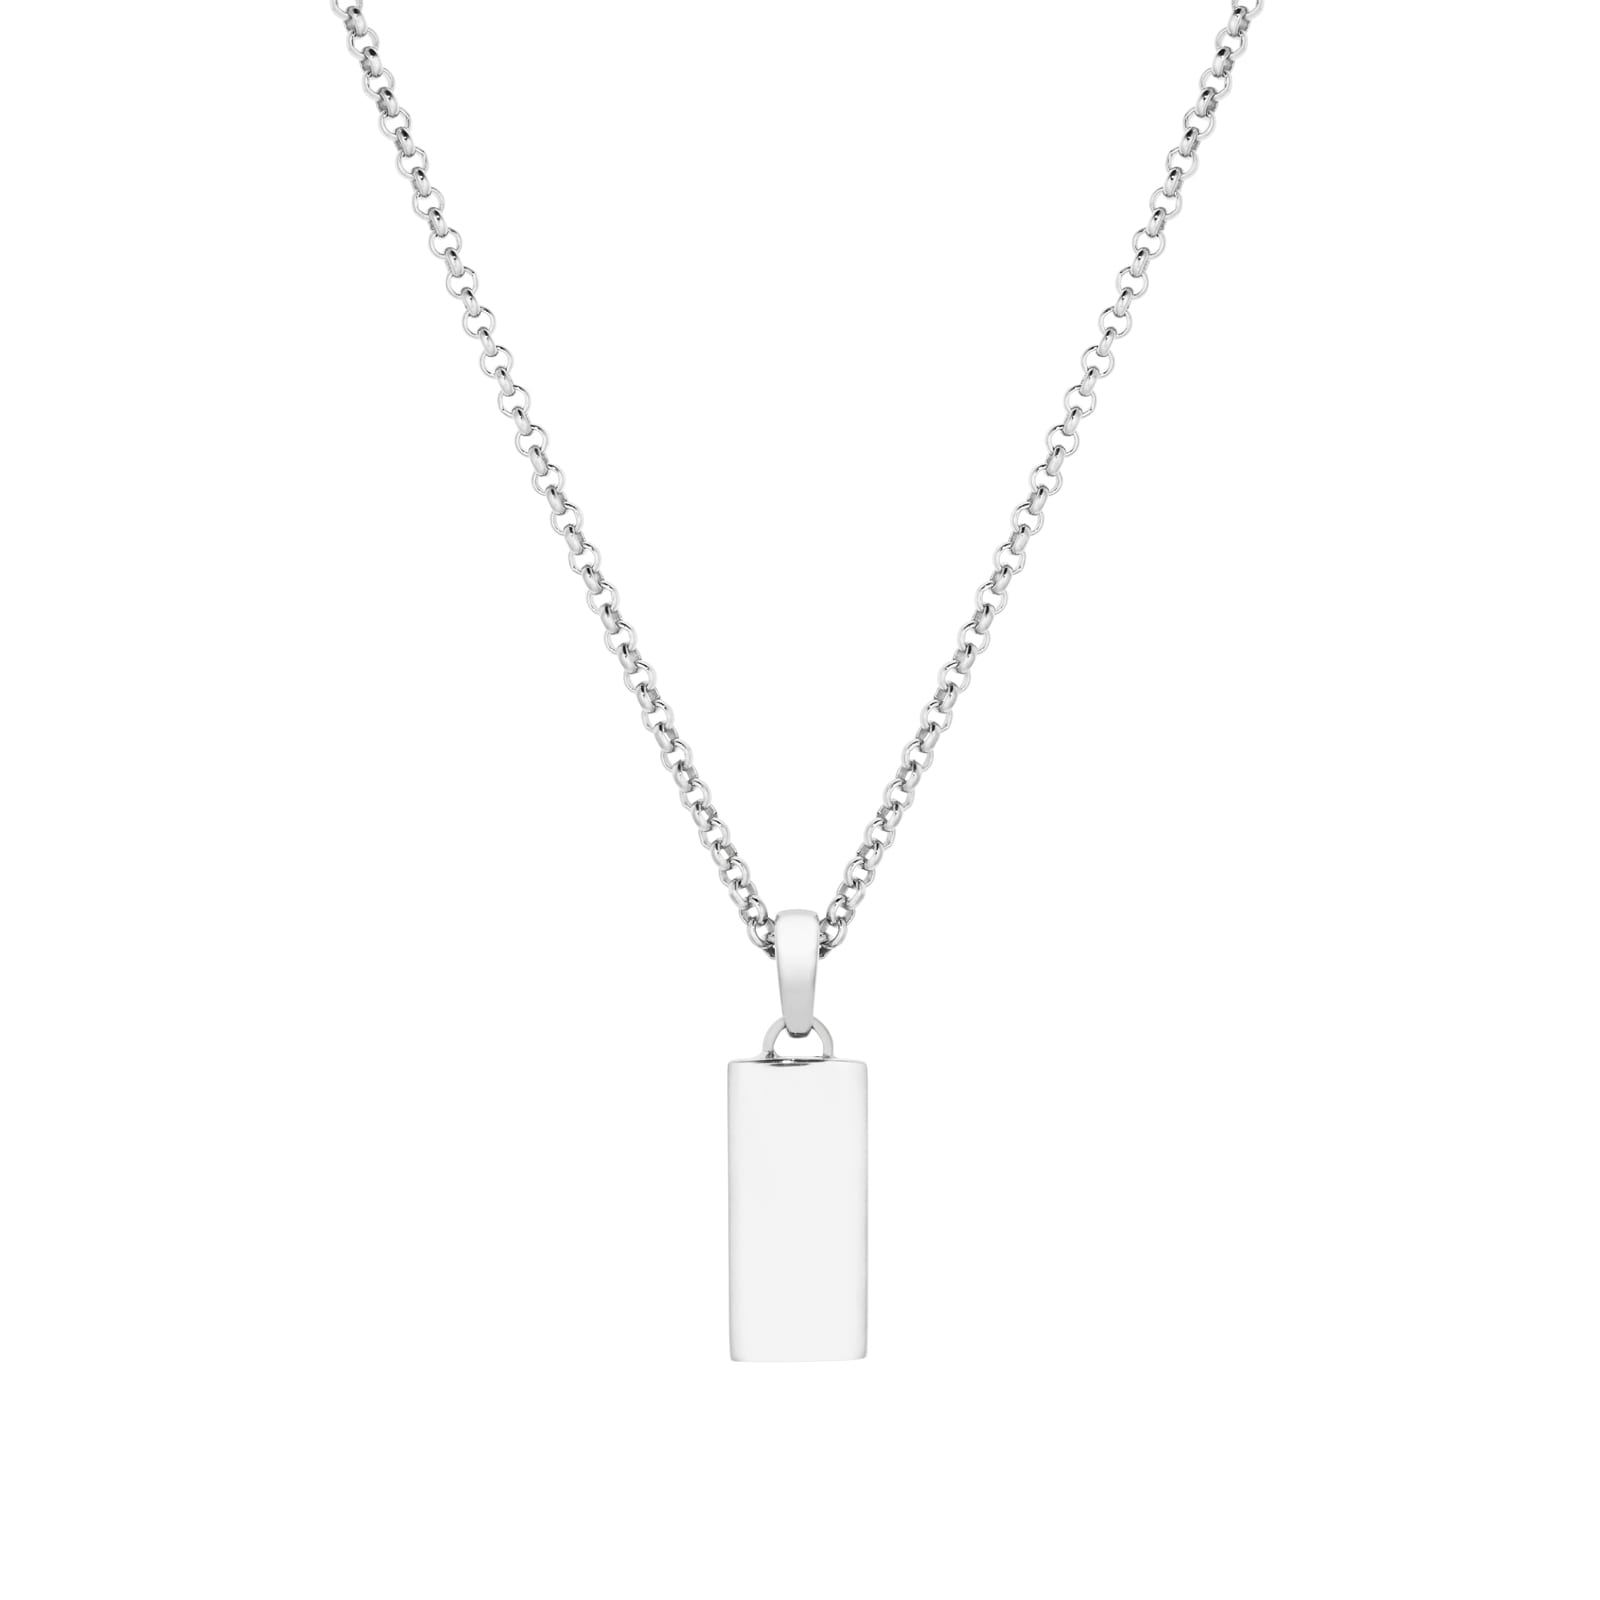 Sterling Silver Bar Pendant Belcher Chain Necklace - Small